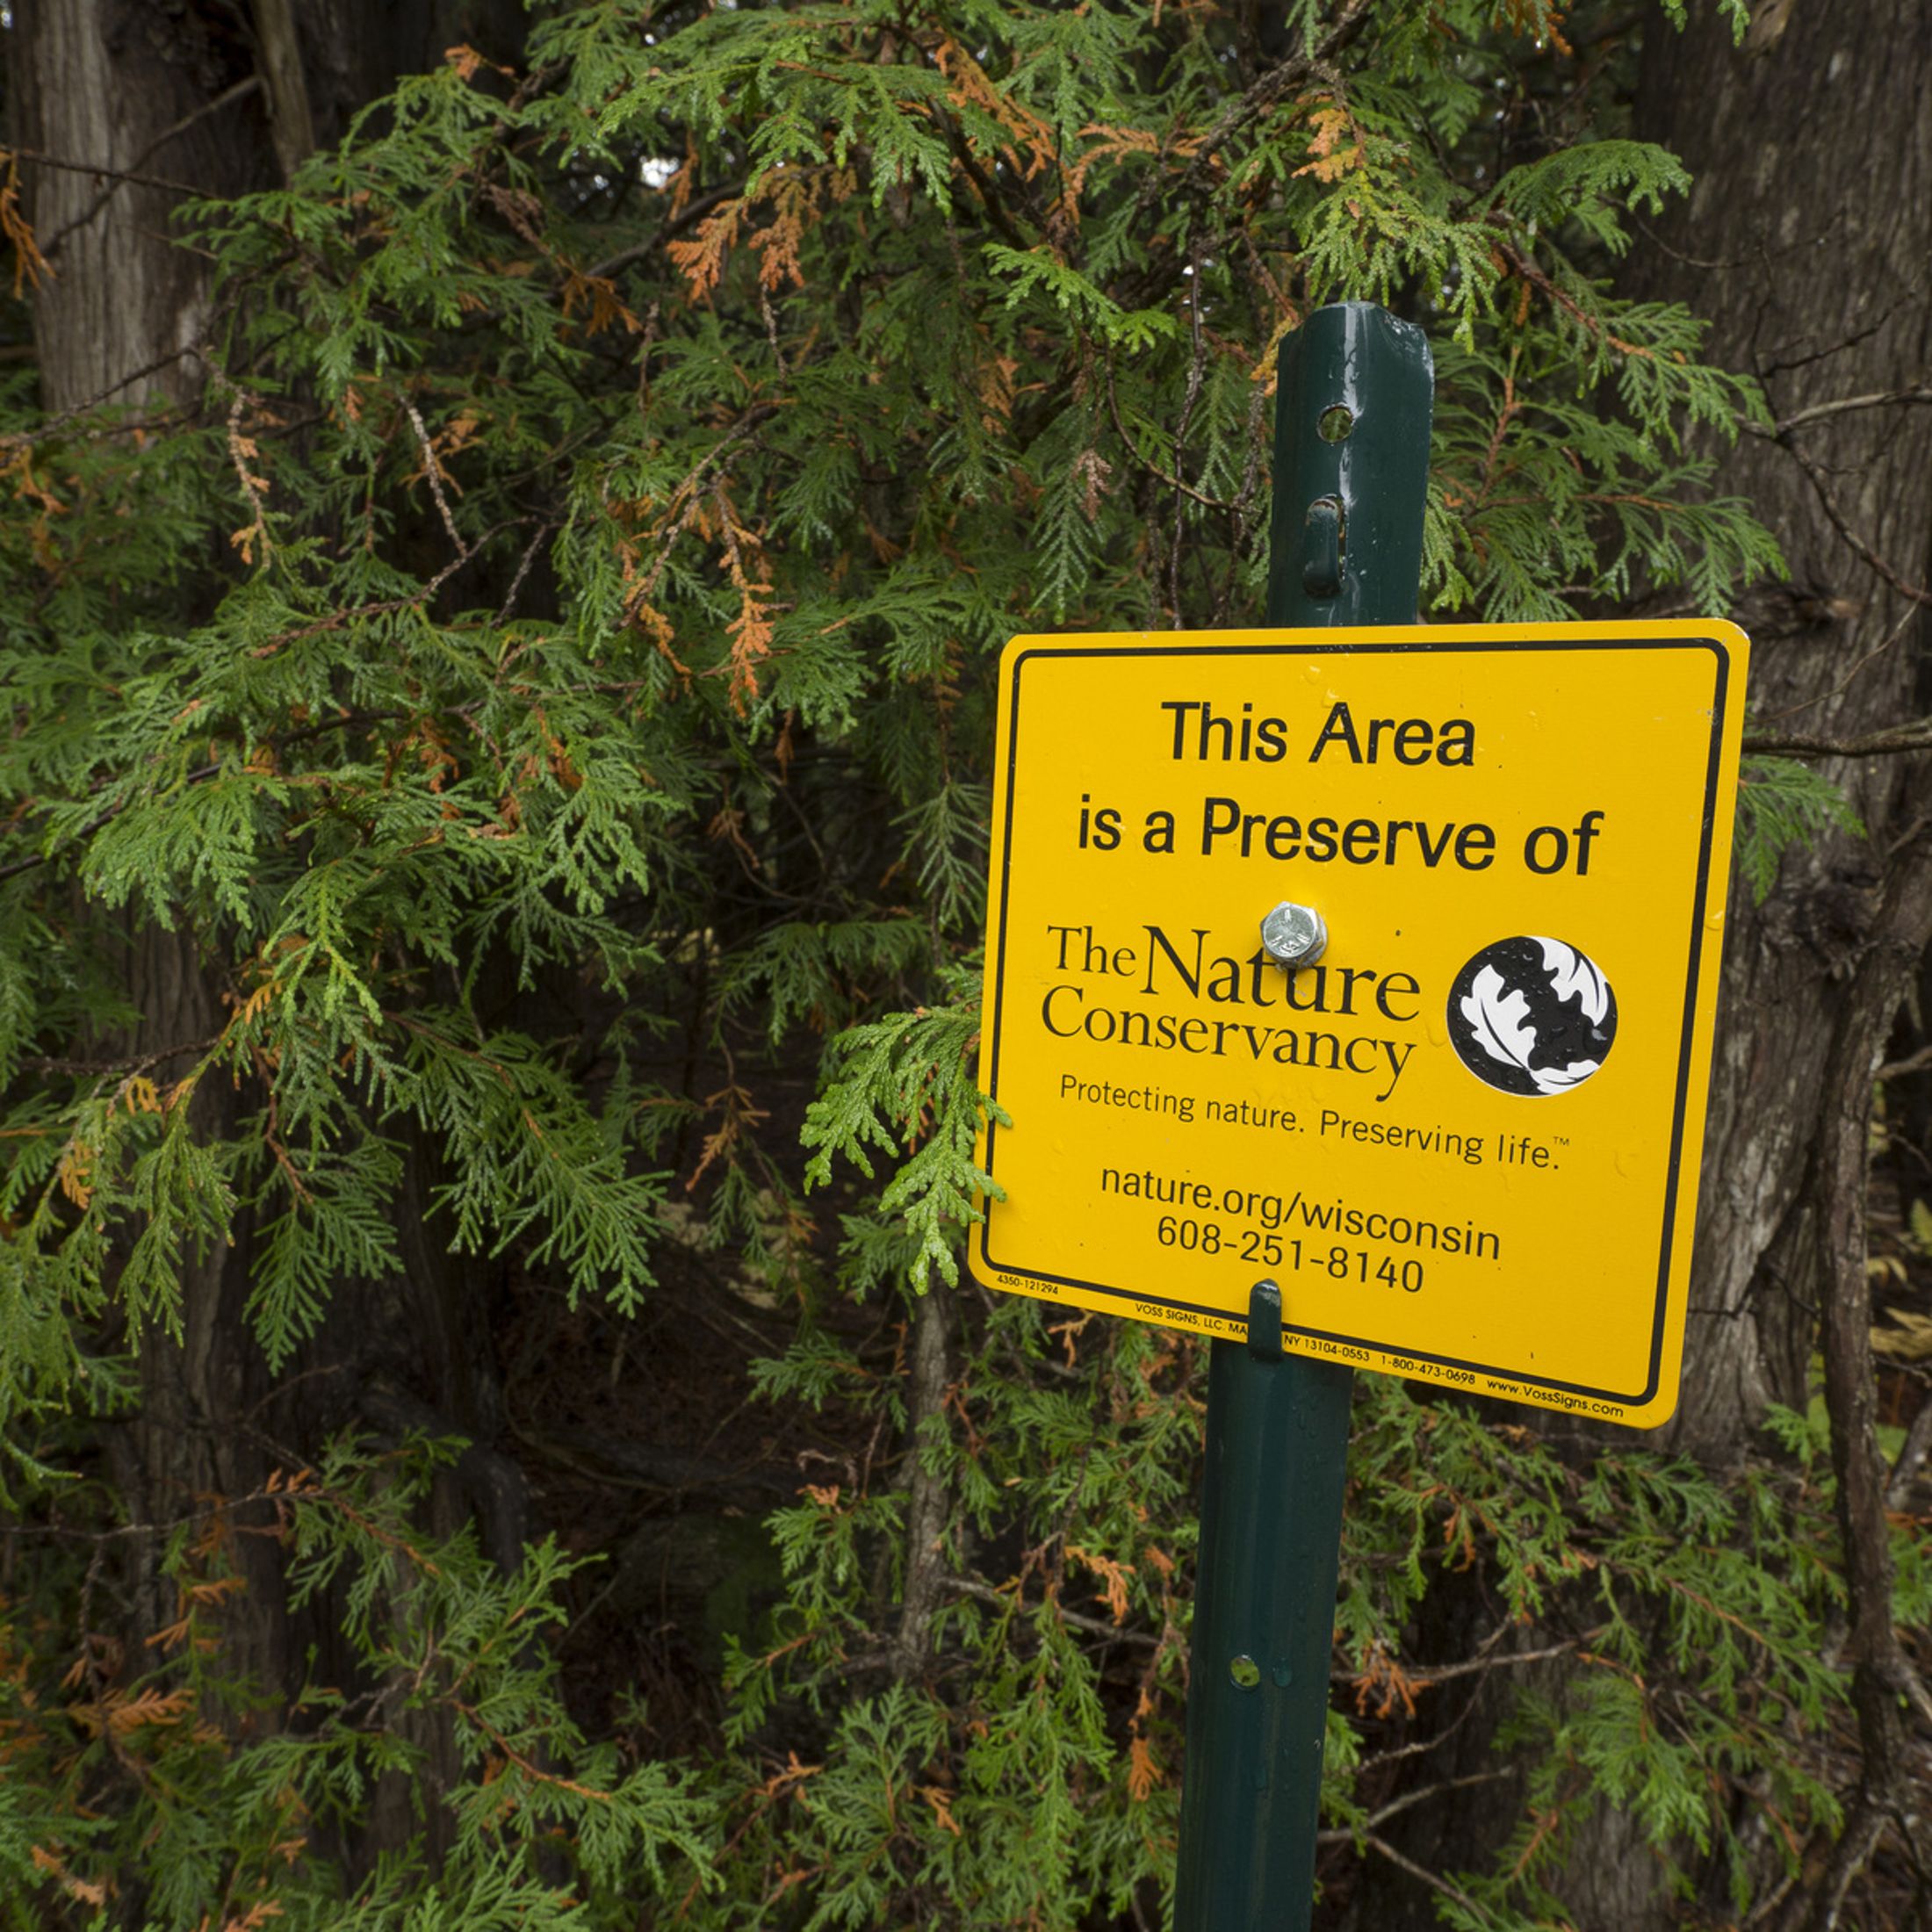 A sign that says this area is a preserve of The Nature Conservancy. Protecting nature. Preserving life. It also includes a vanity URL and a phone number.